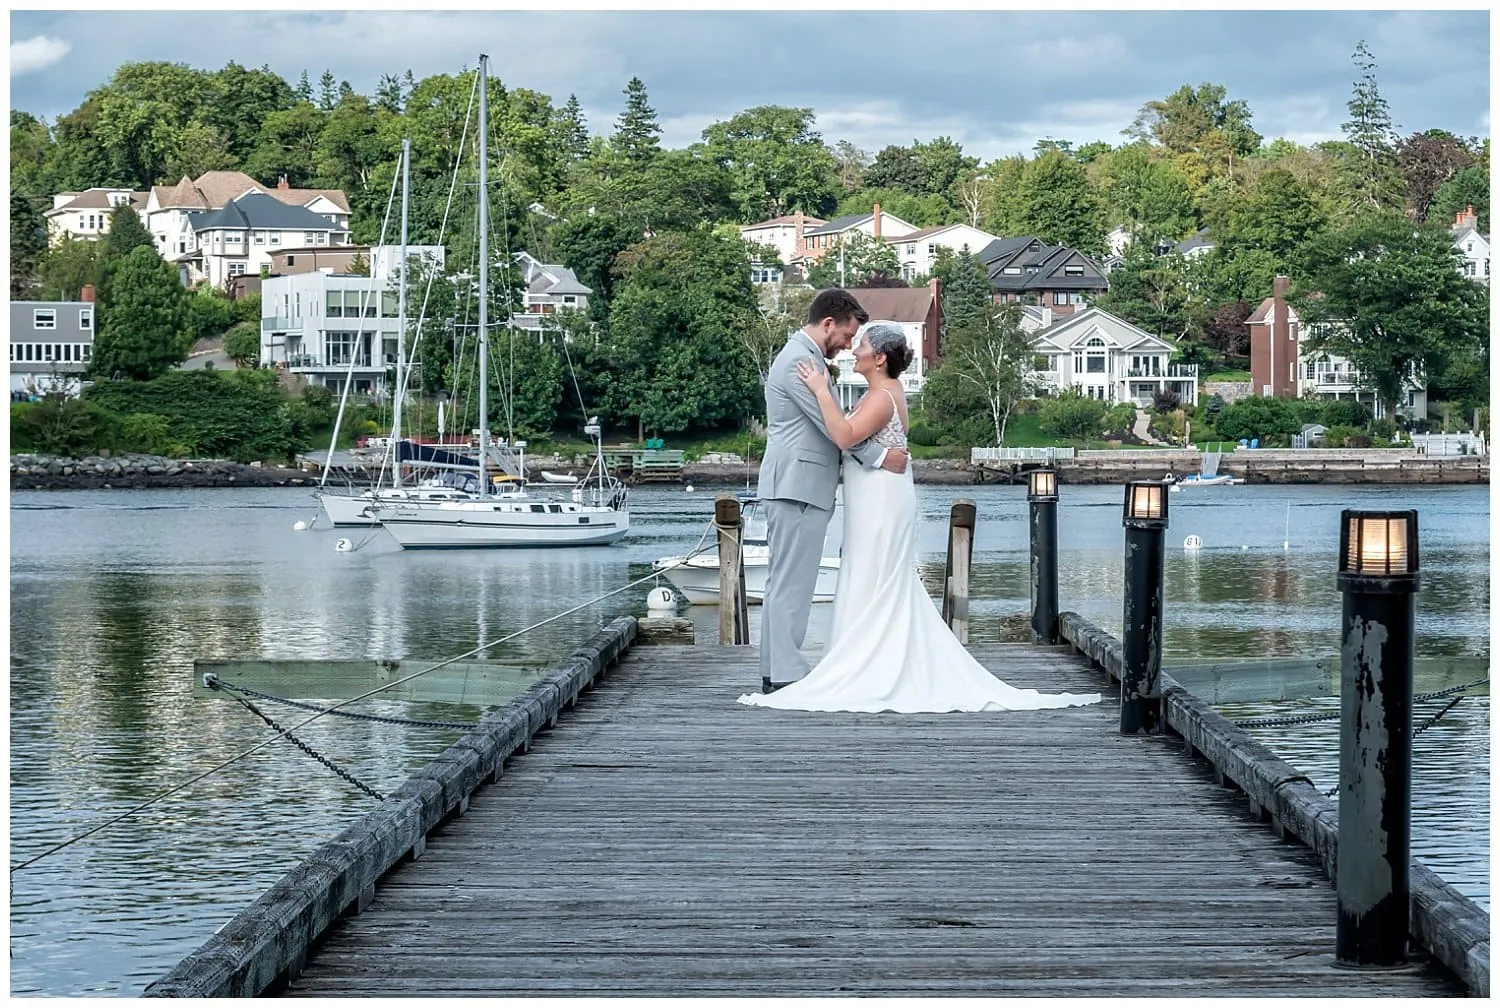 The bride and groom pose for their wedding photos on the wharf at Saraguay House overlooking the ocean.